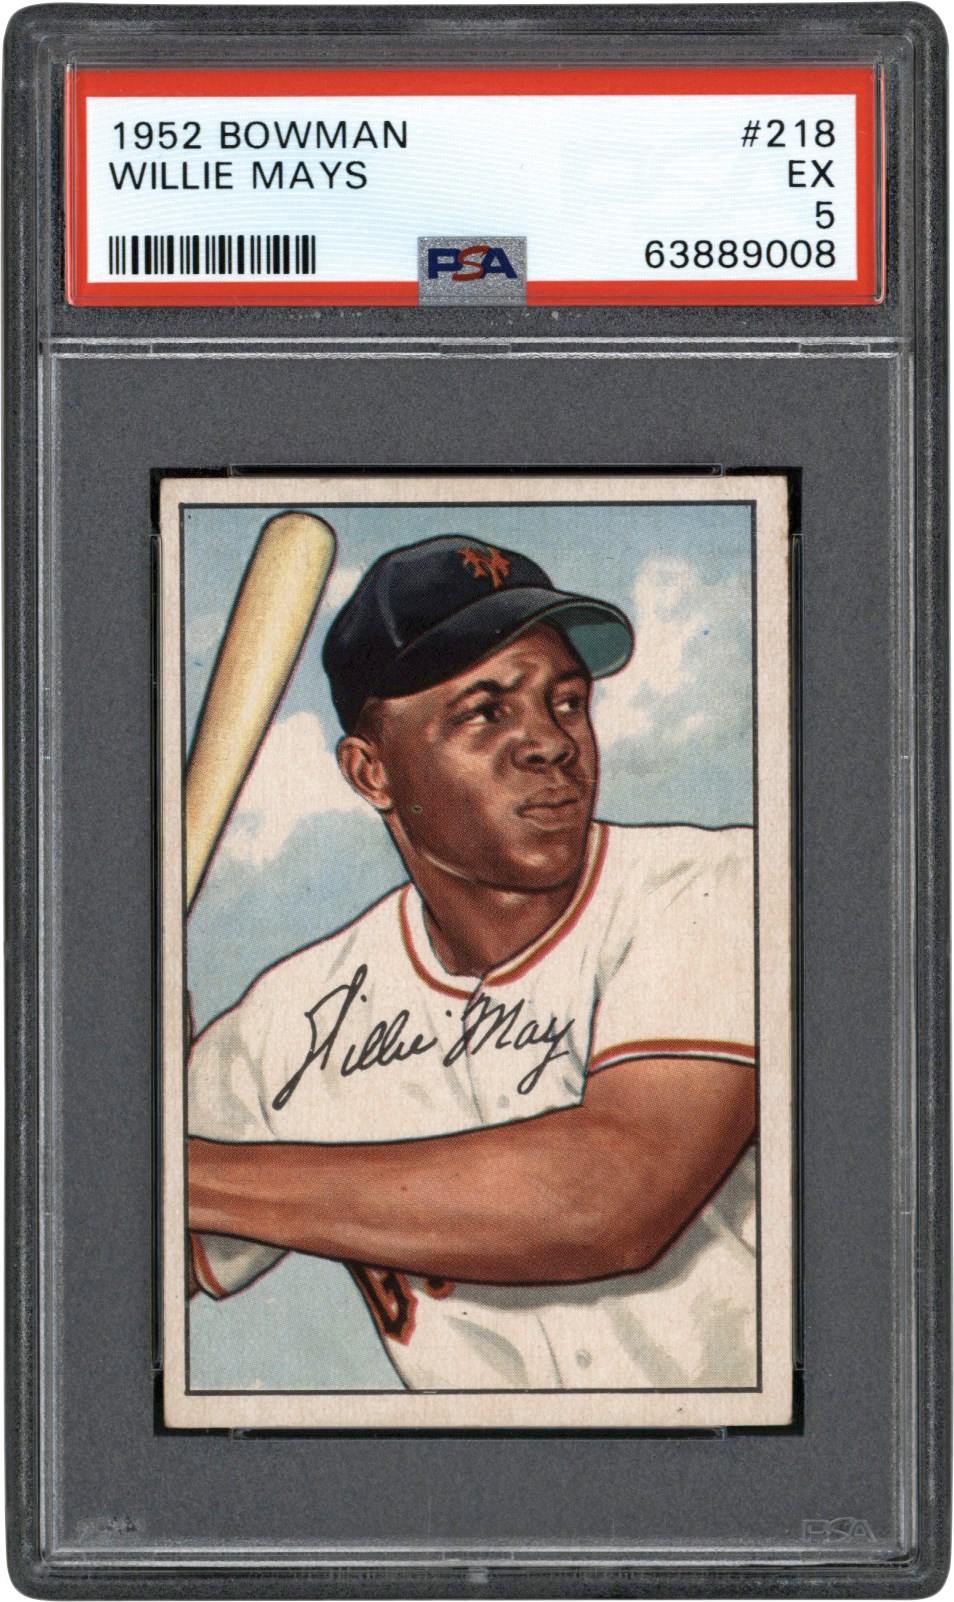 - 1952 Bowman #218 Willie Mays PSA EX 5 - Newly Discovered Example